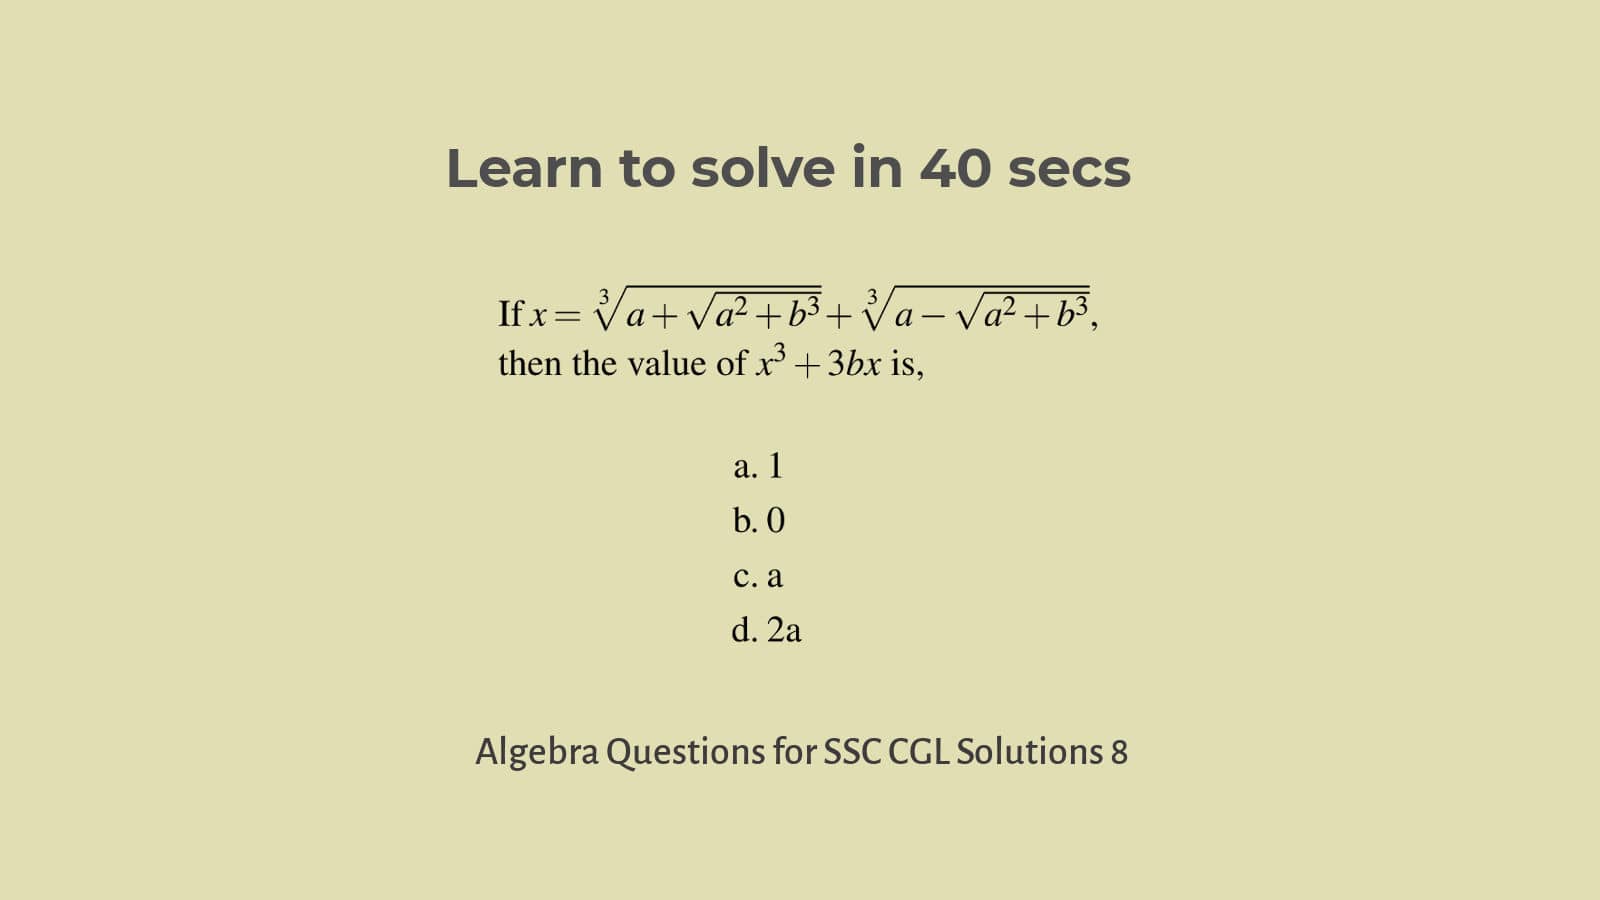 Solution to Algebra questions for SSC CGL Set 8